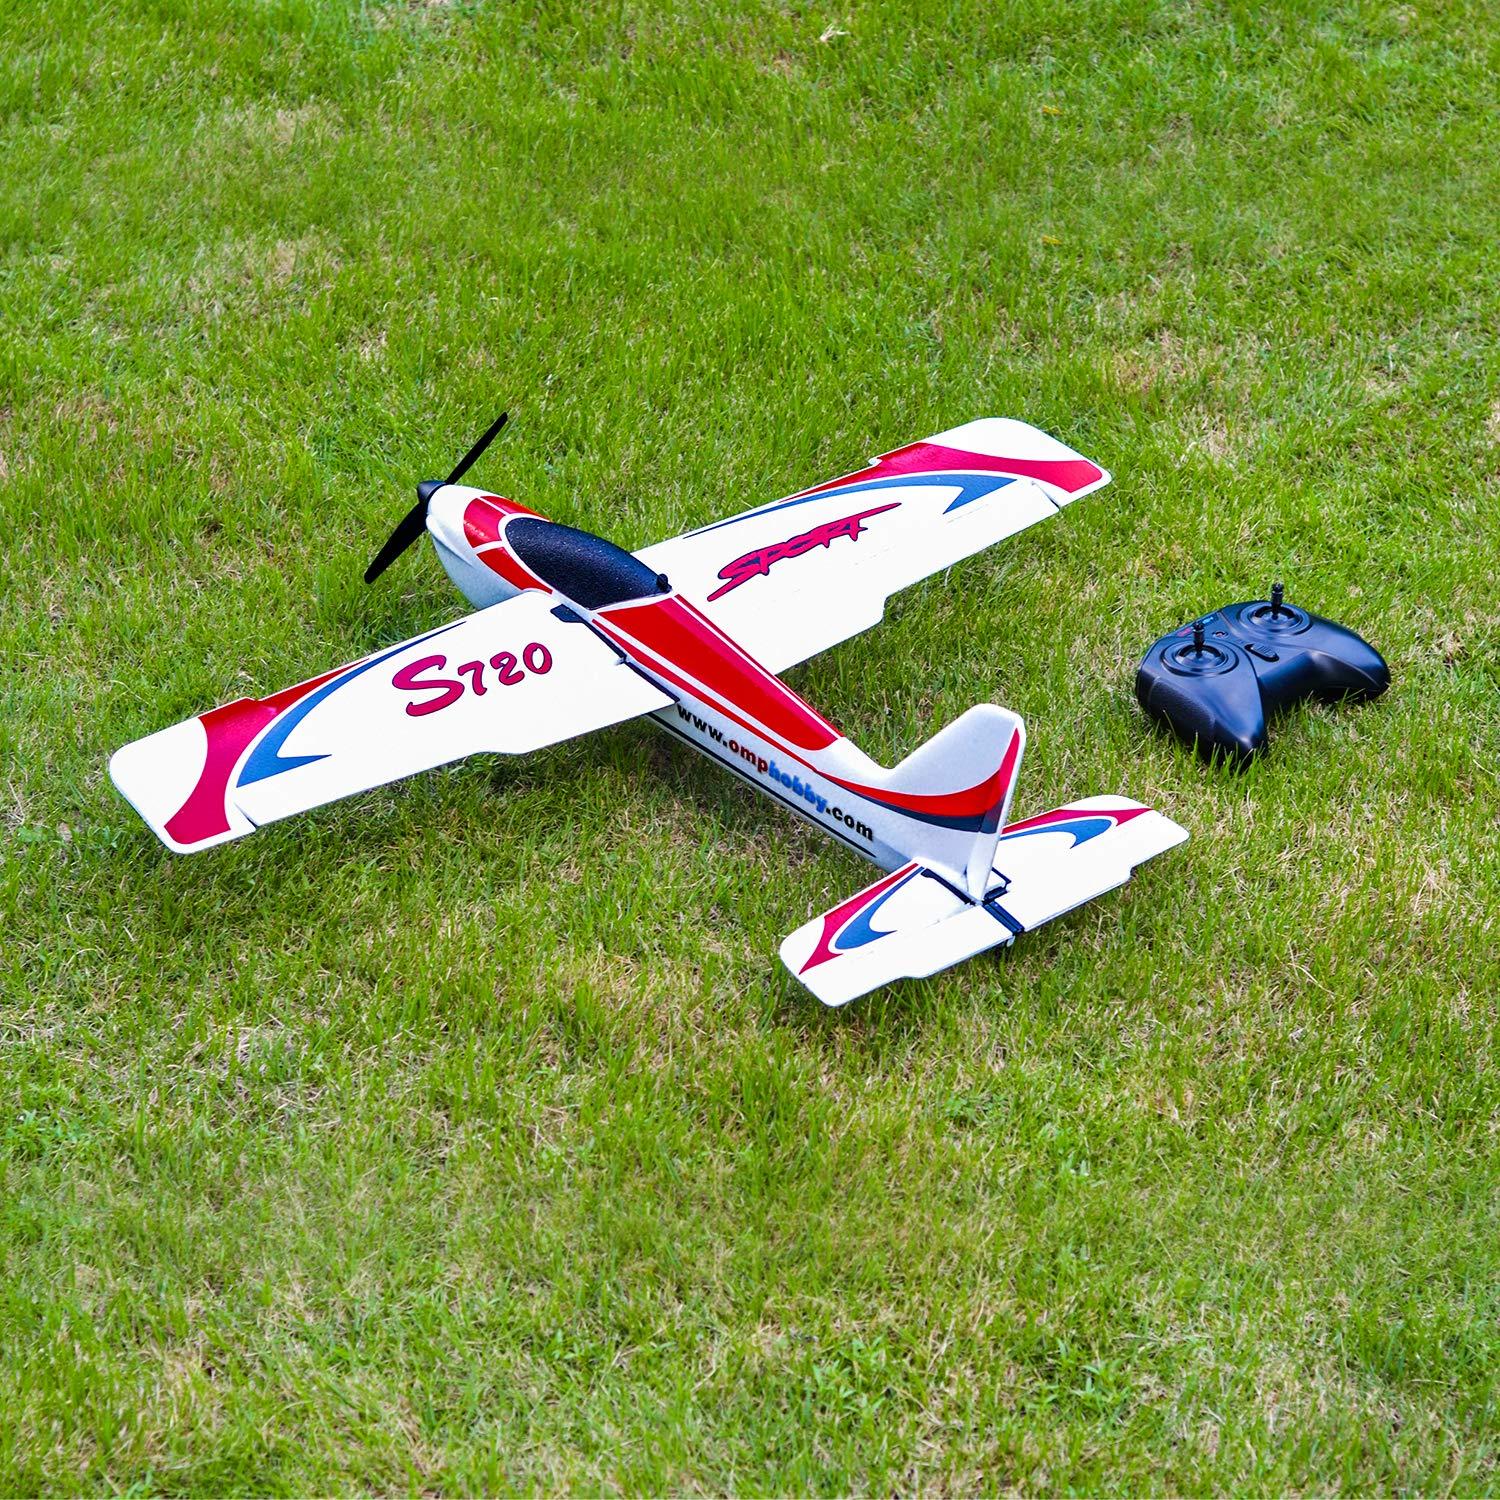 S720 Rc Plane: Perfect for beginners and experts alike: The s720 RC plane